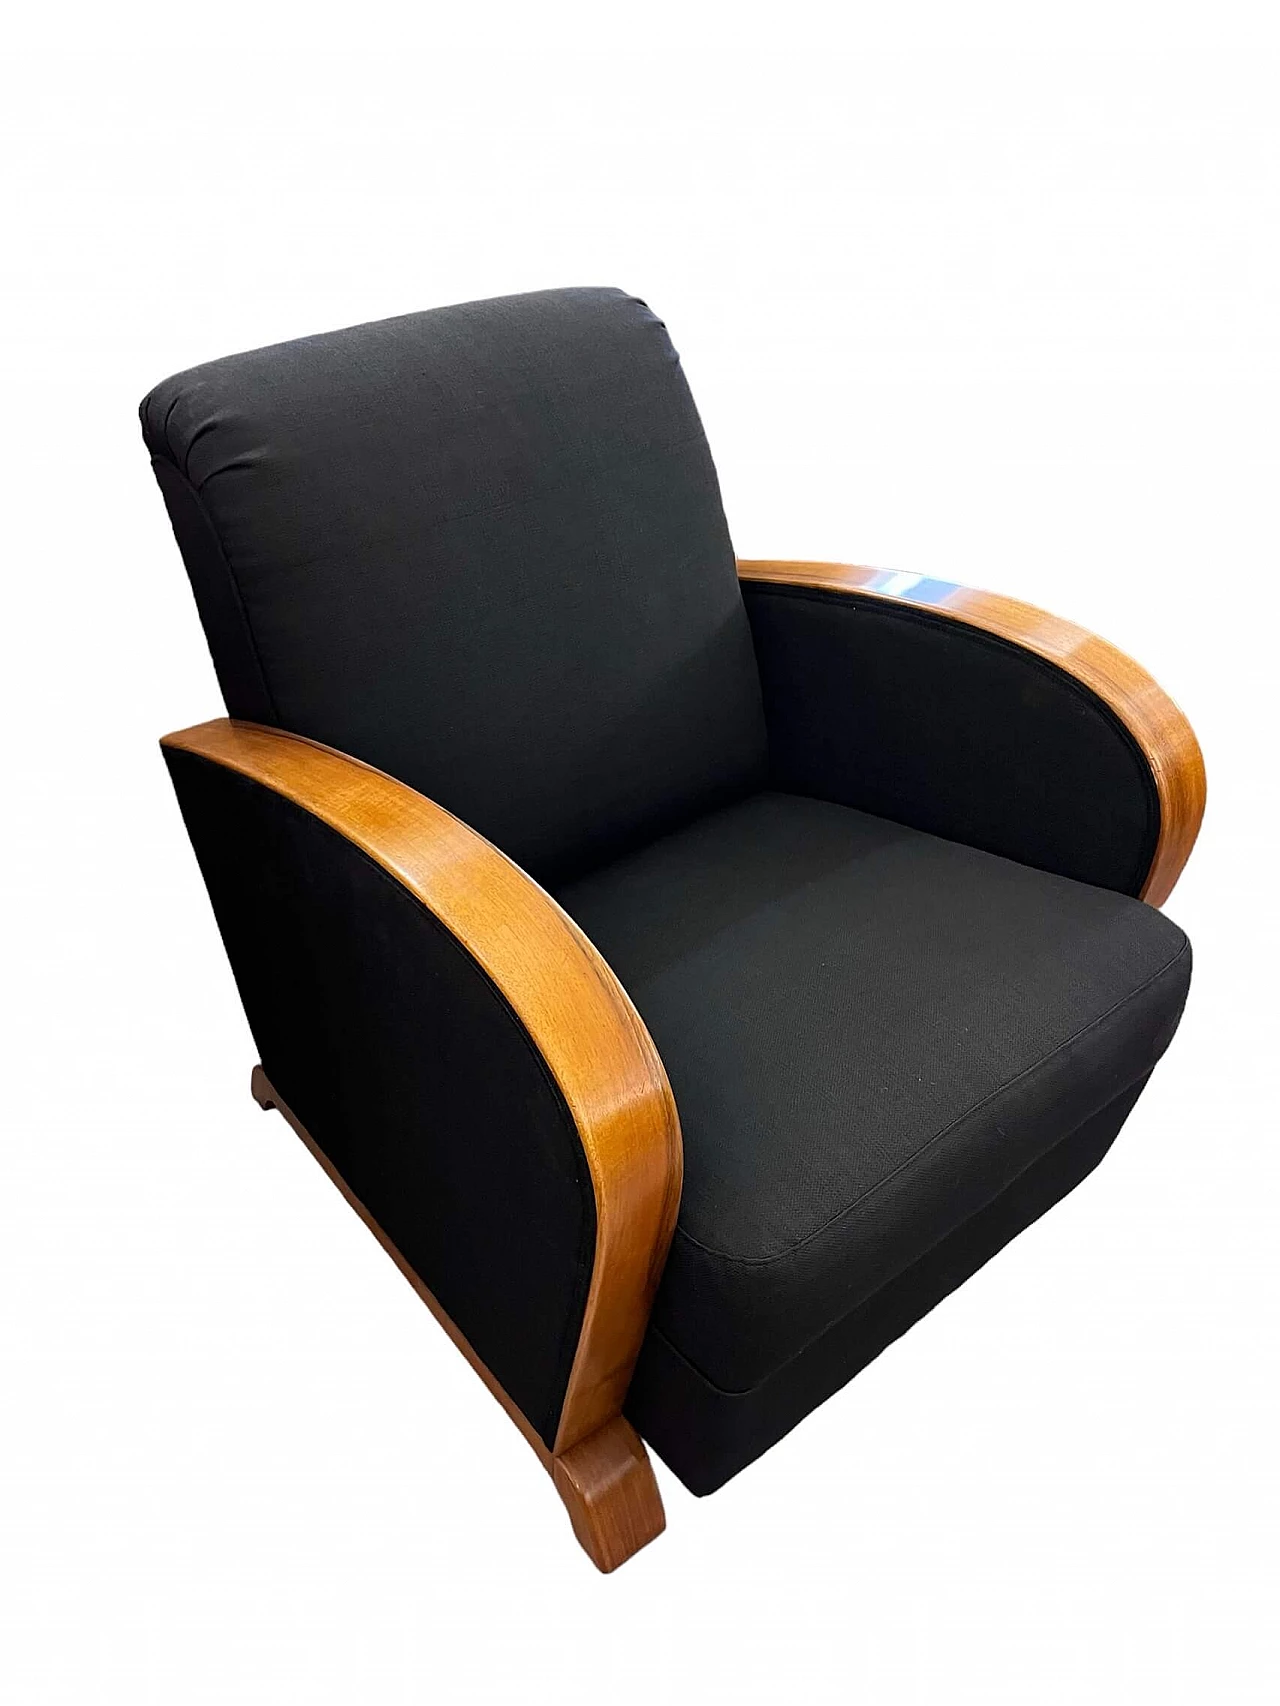 French Art Deco blond walnut and black fabric armchair, 1930s 1